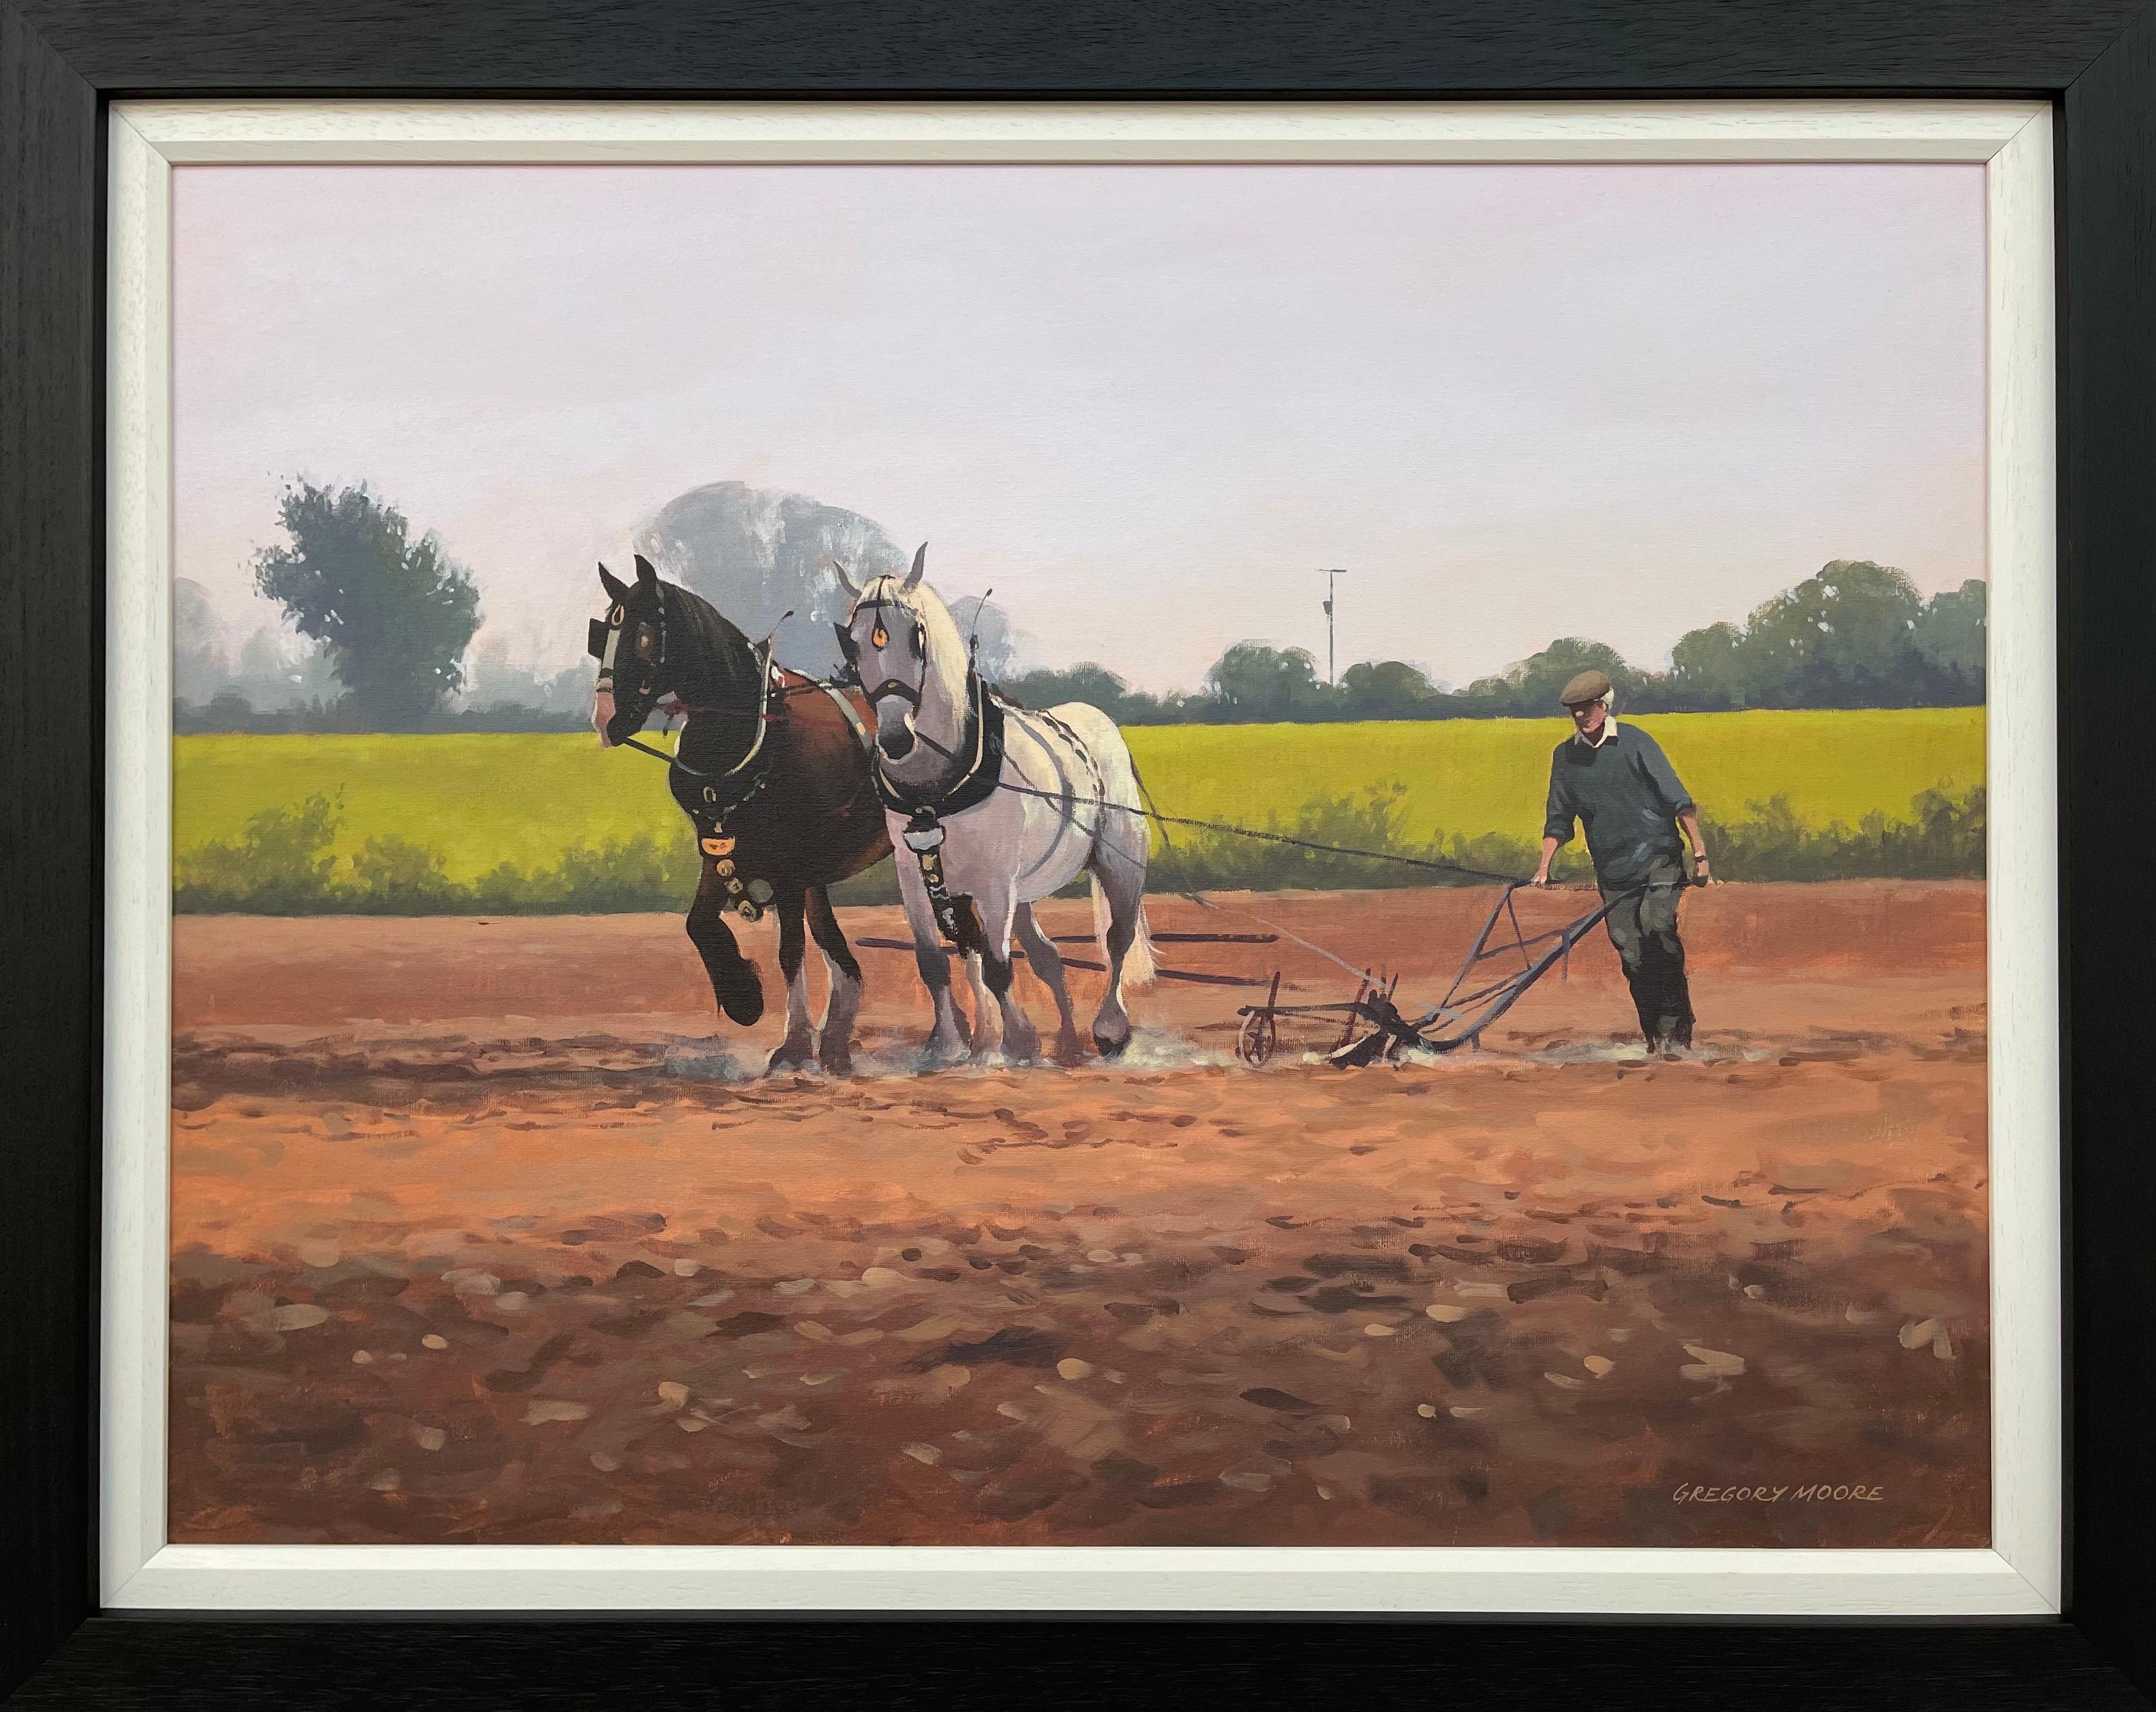 Horses with Farmer & Plough in Ireland Countryside by Contemporary Irish Artist